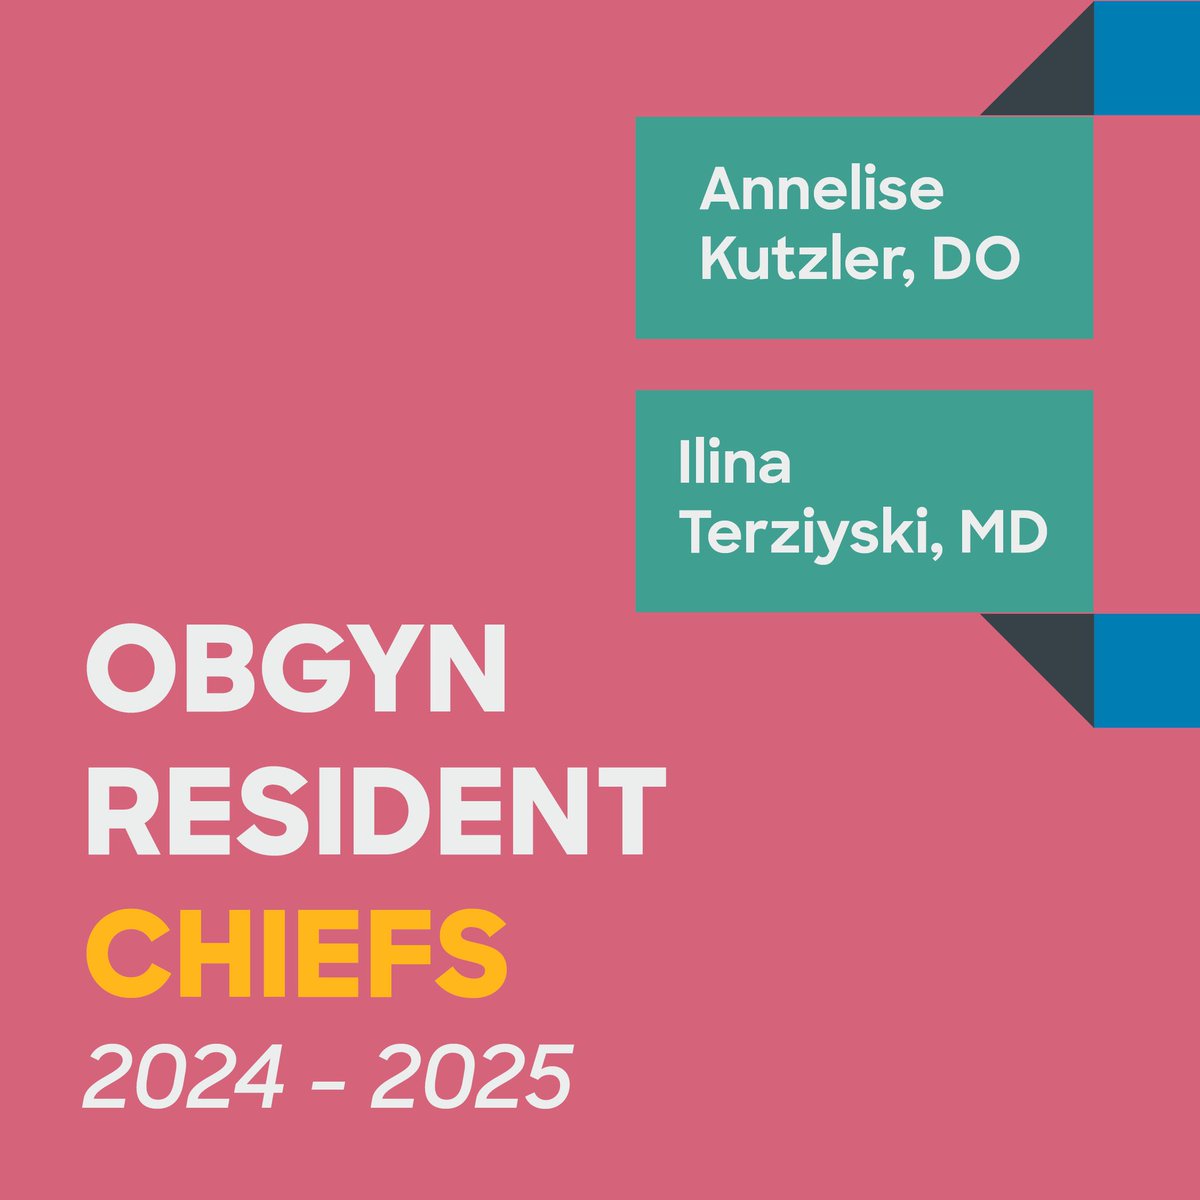 Not one but two recent #TCOM graduates are being elevated to Chief Residents. Class of 2022 graduate Dr. Patrick Feng is the upcoming chief at @Med_City_Health Family Medicine Program, while Class of 2020 graduate Dr. Annelise Kutzler is the OBGYN chief at @BSWH_FW_GME .👏👏